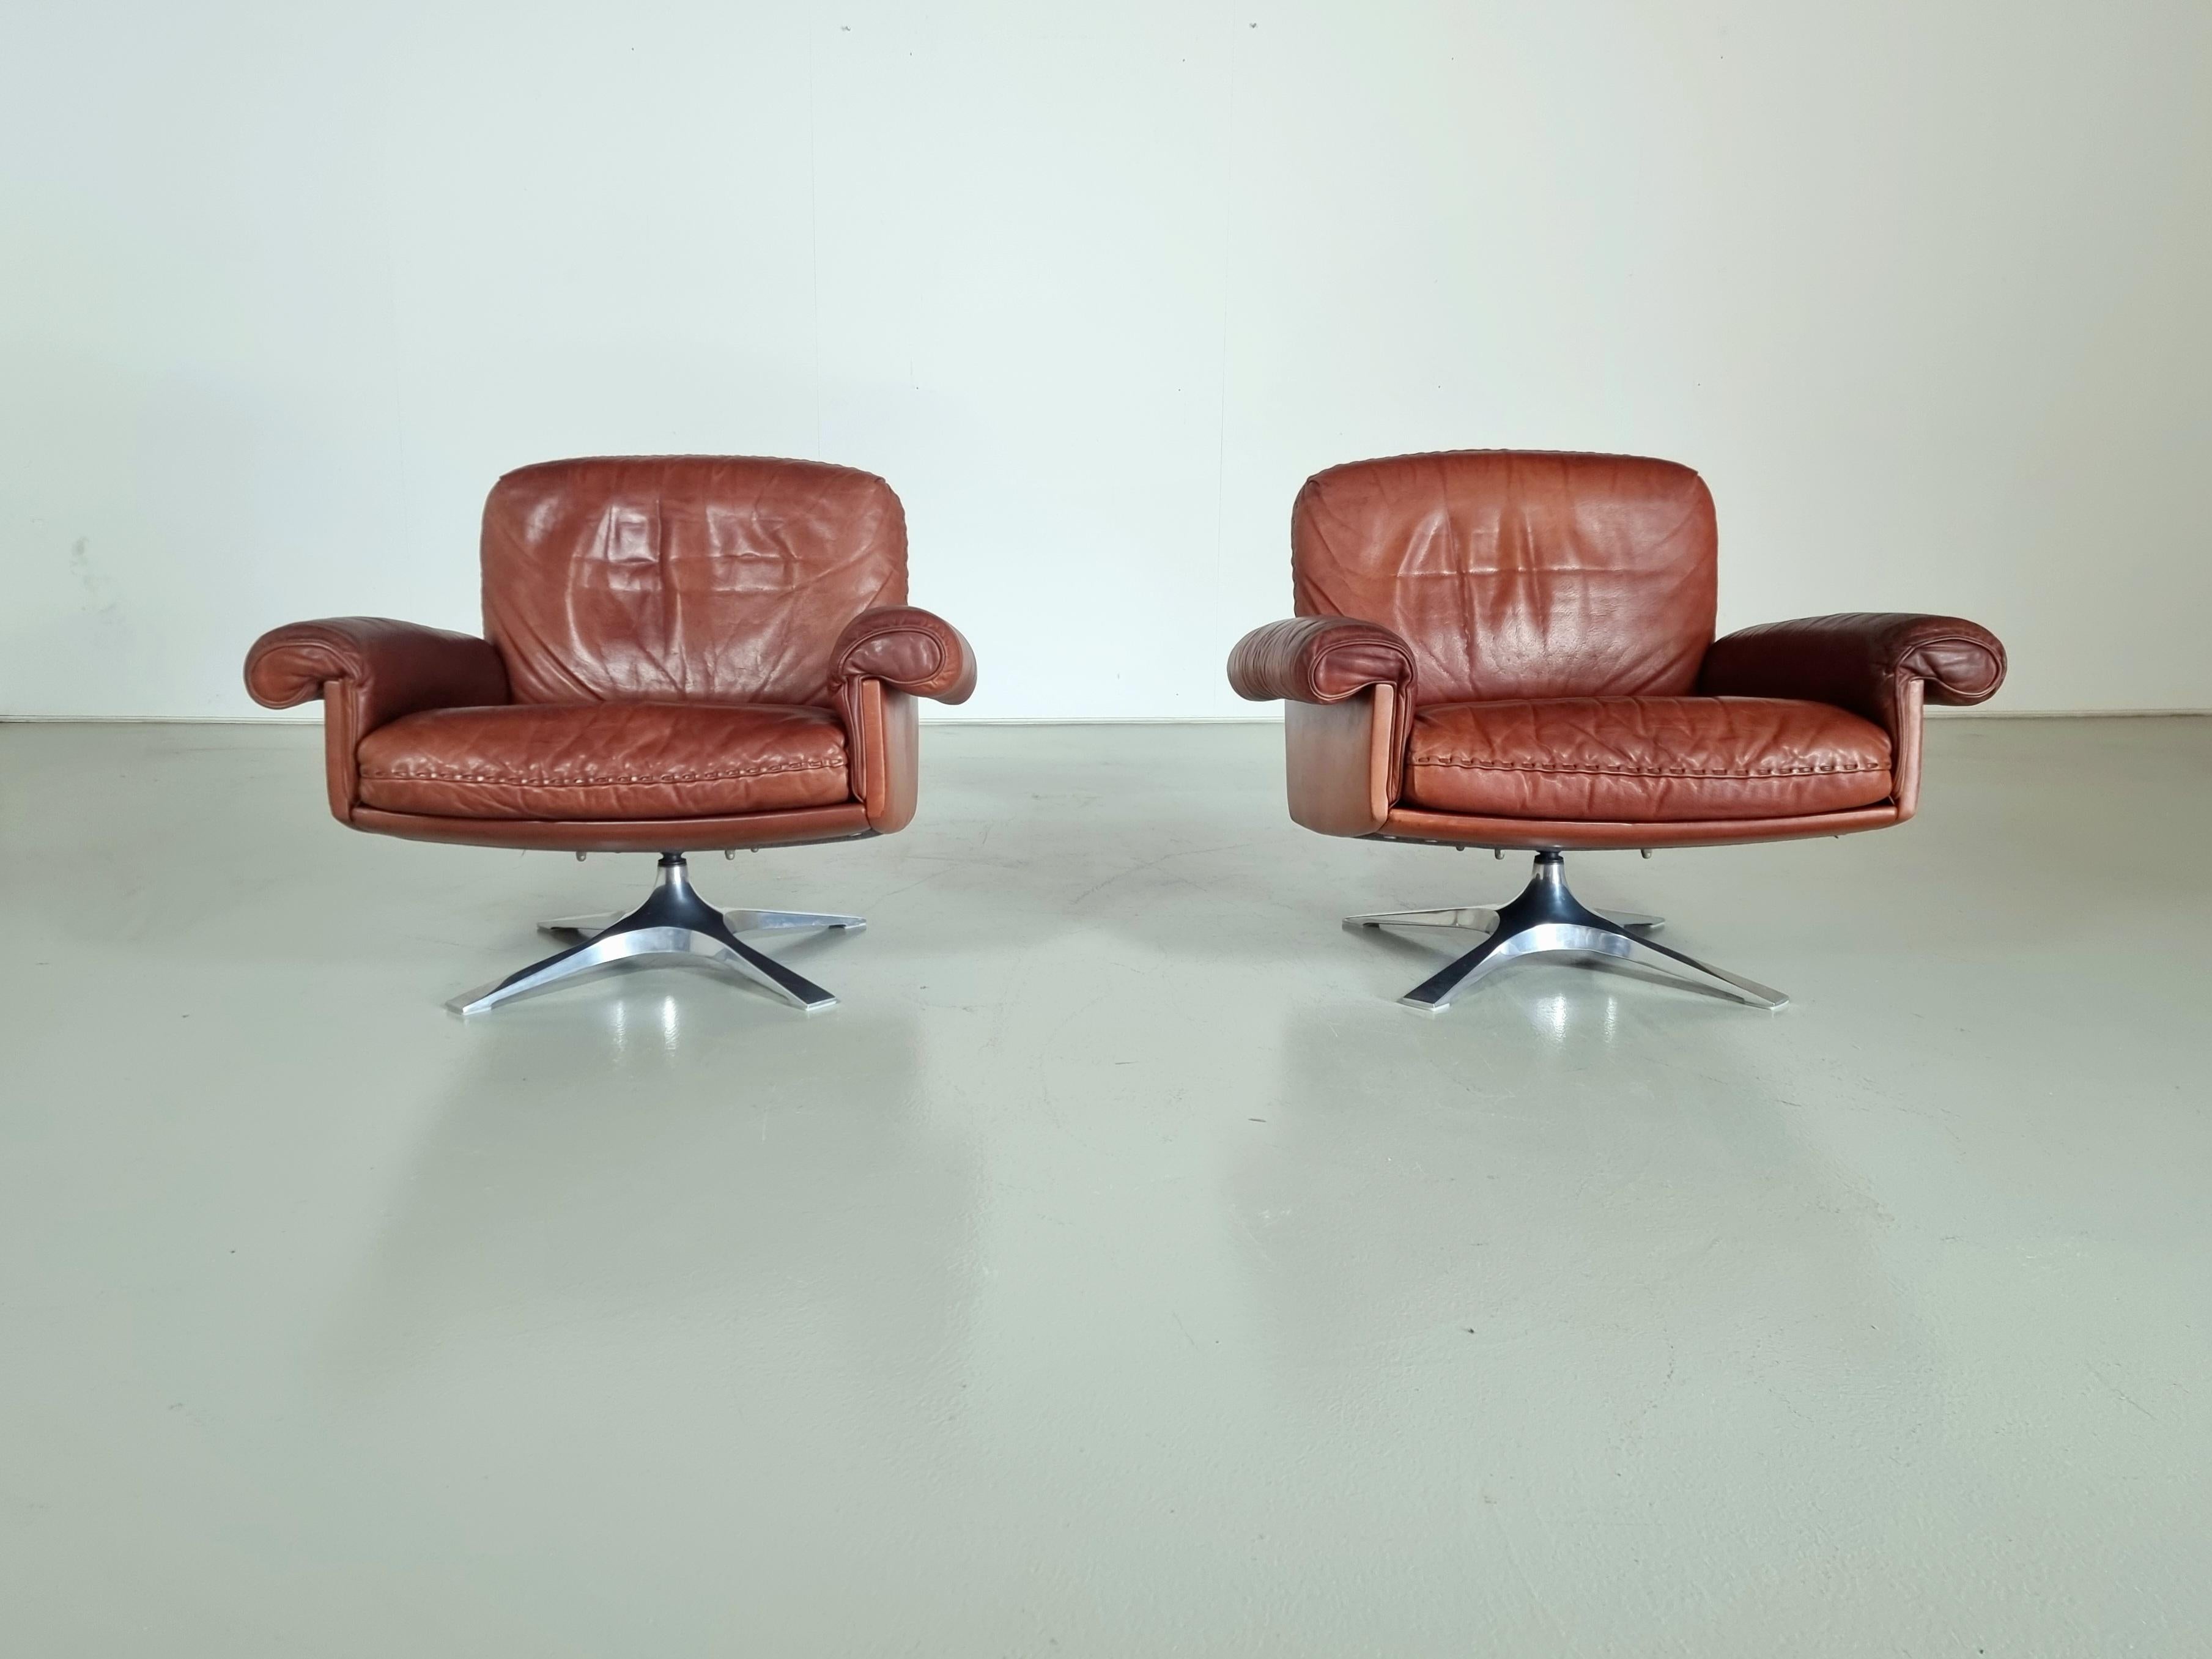 De Sede, pair of lounge chairs model ''DS-31'', leather, chrome-plated metal, Switzerland, 1970s

A comfortable sitting experience is guaranteed by means of the deep seat and curved armrests. Also, the thick leather seating cushions provide an